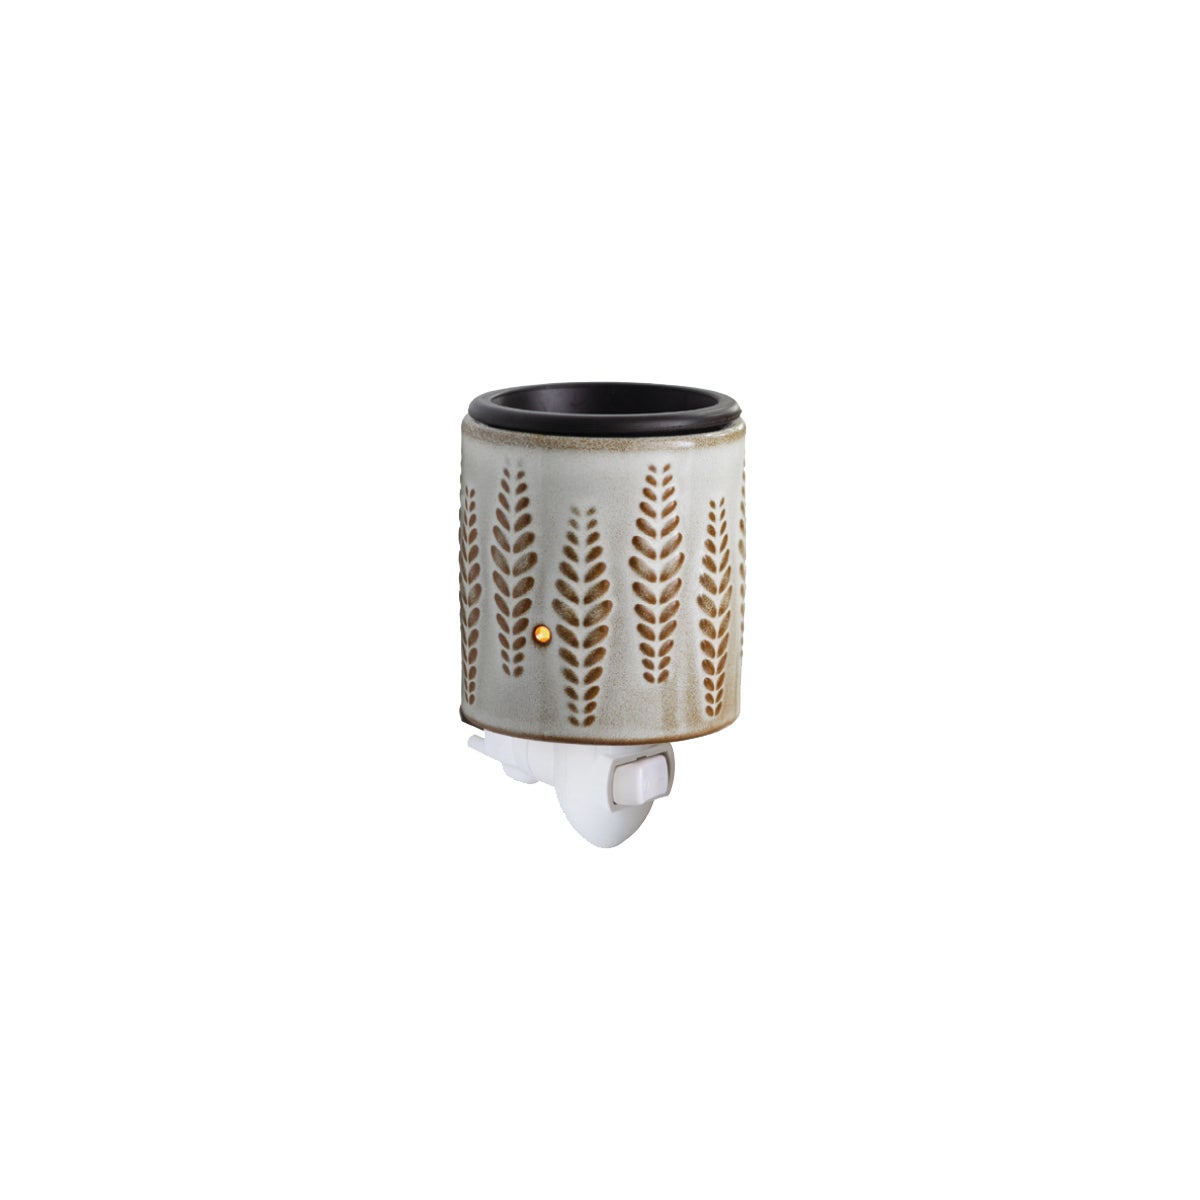 Flip Dish Pluggable Fragrance Warmer - Wheat and Ivory